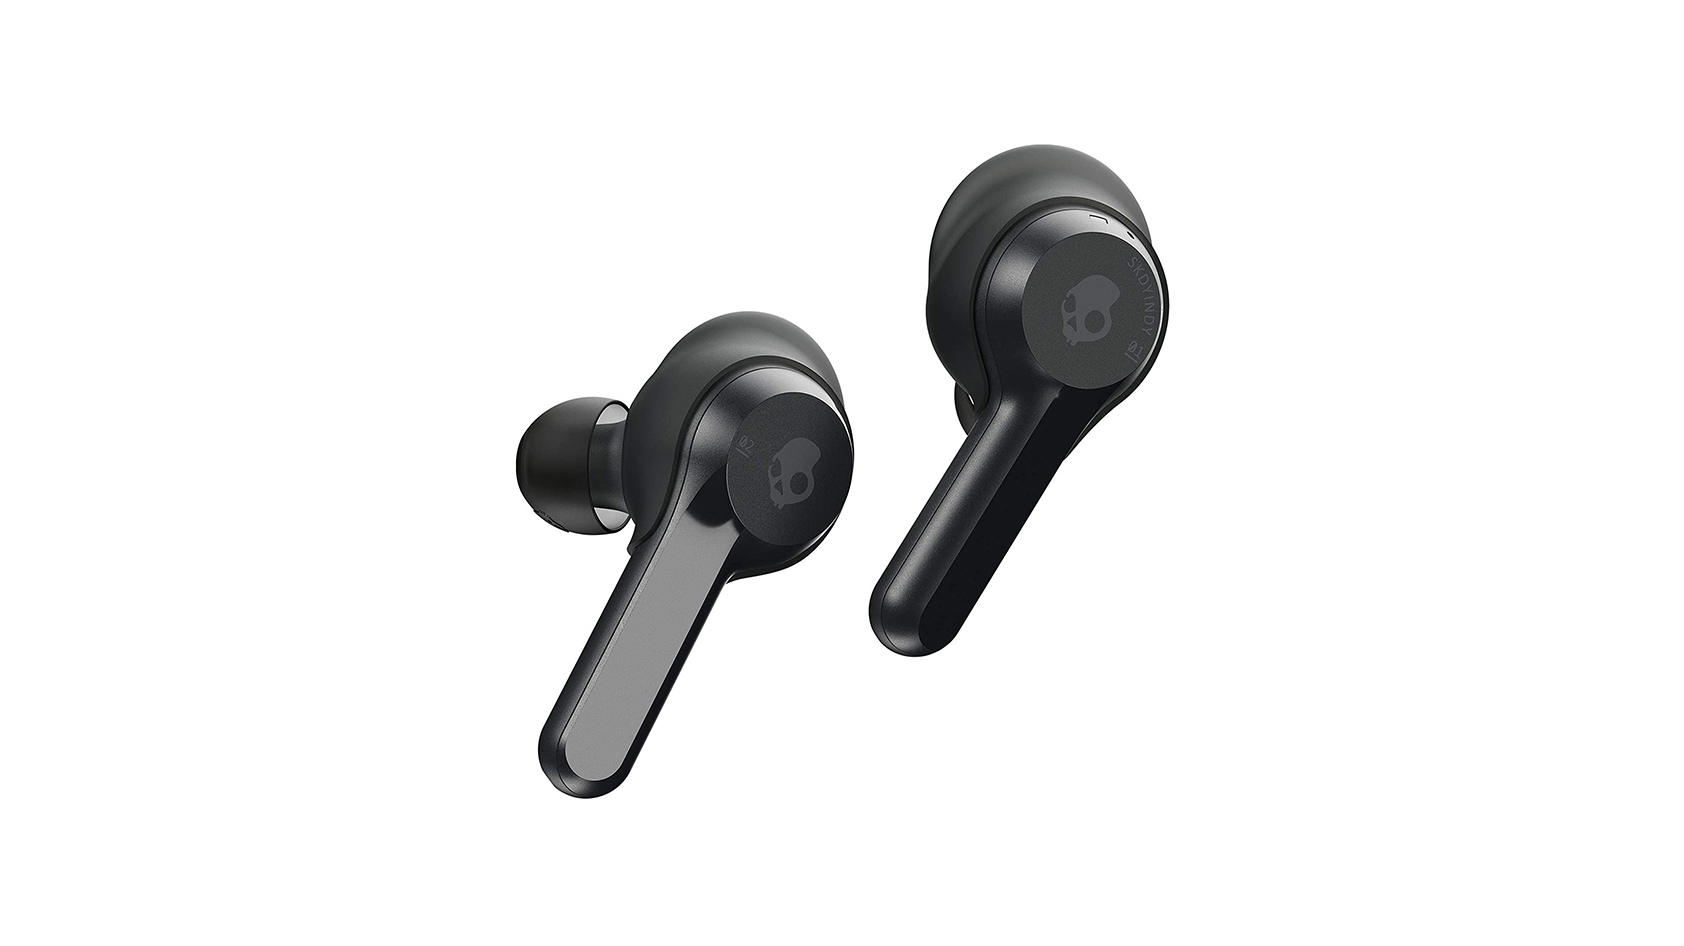 The Skullcandy Indy true wireless earbuds in black against a white background.